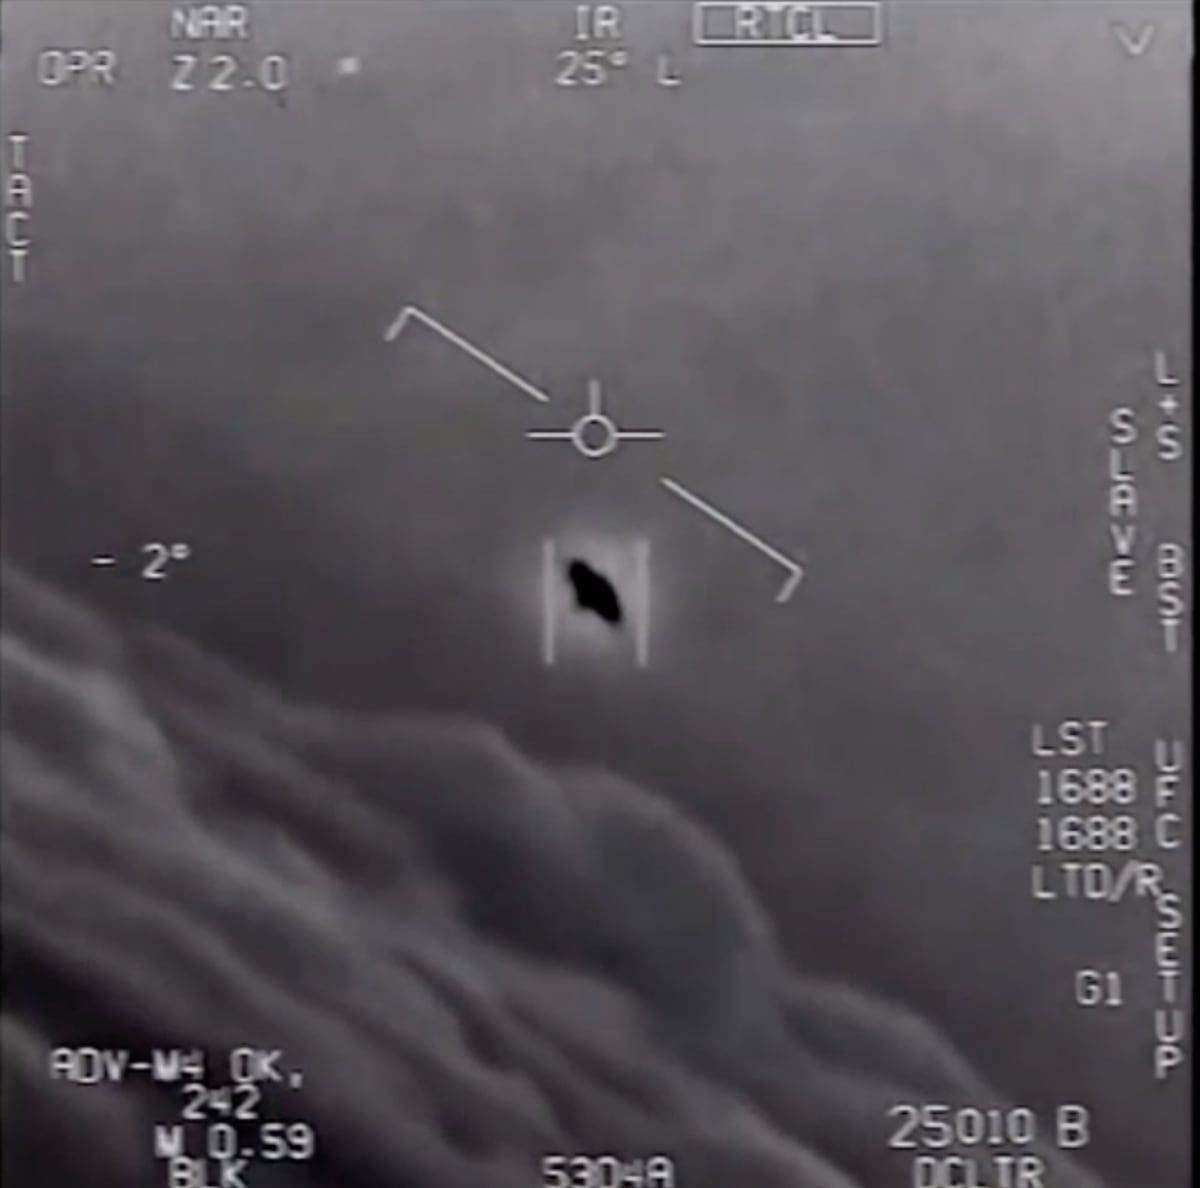 Video shows apparent encounter between Navy pilot and UFO